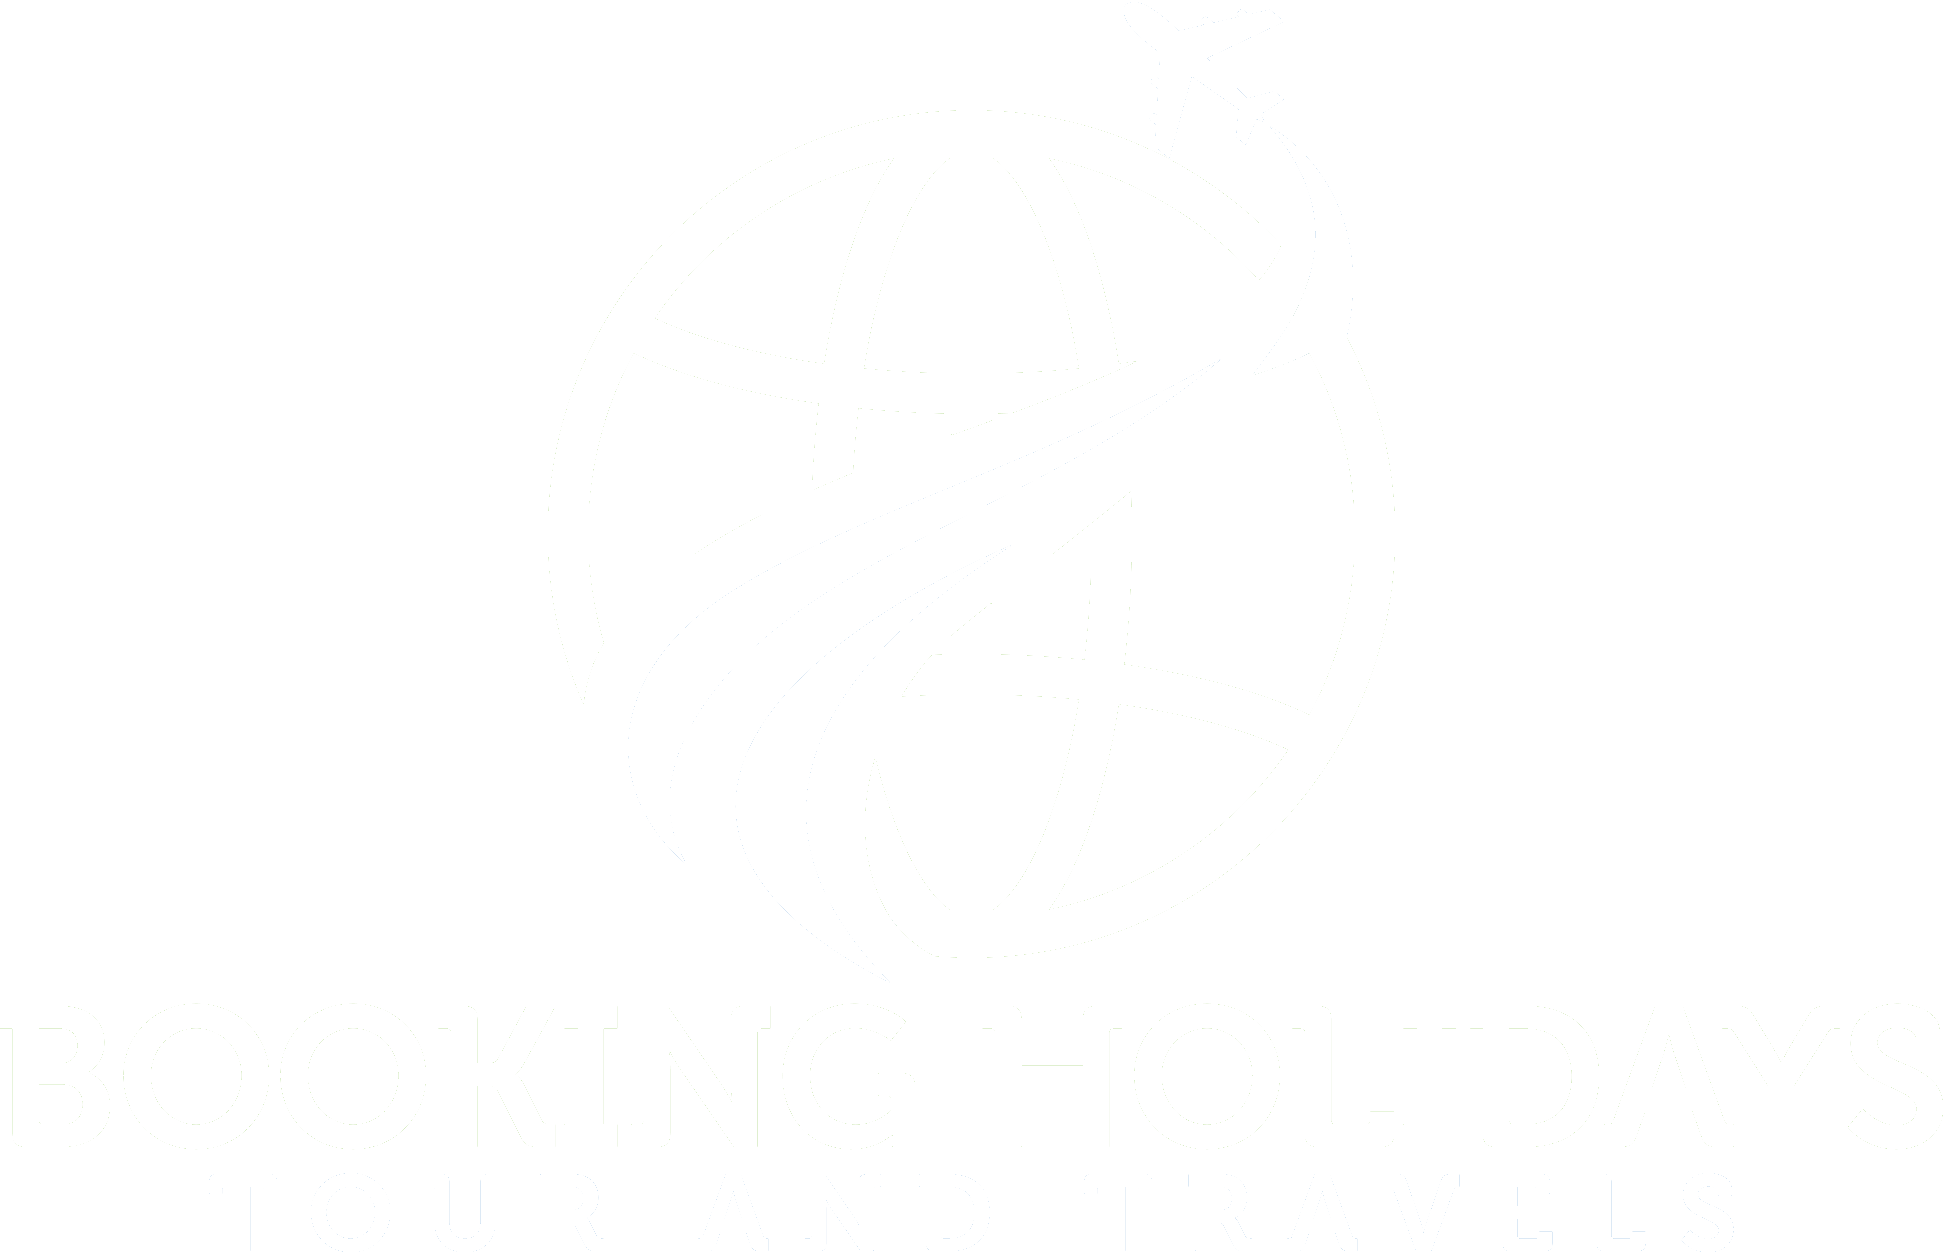 The Booking Holidays Logo